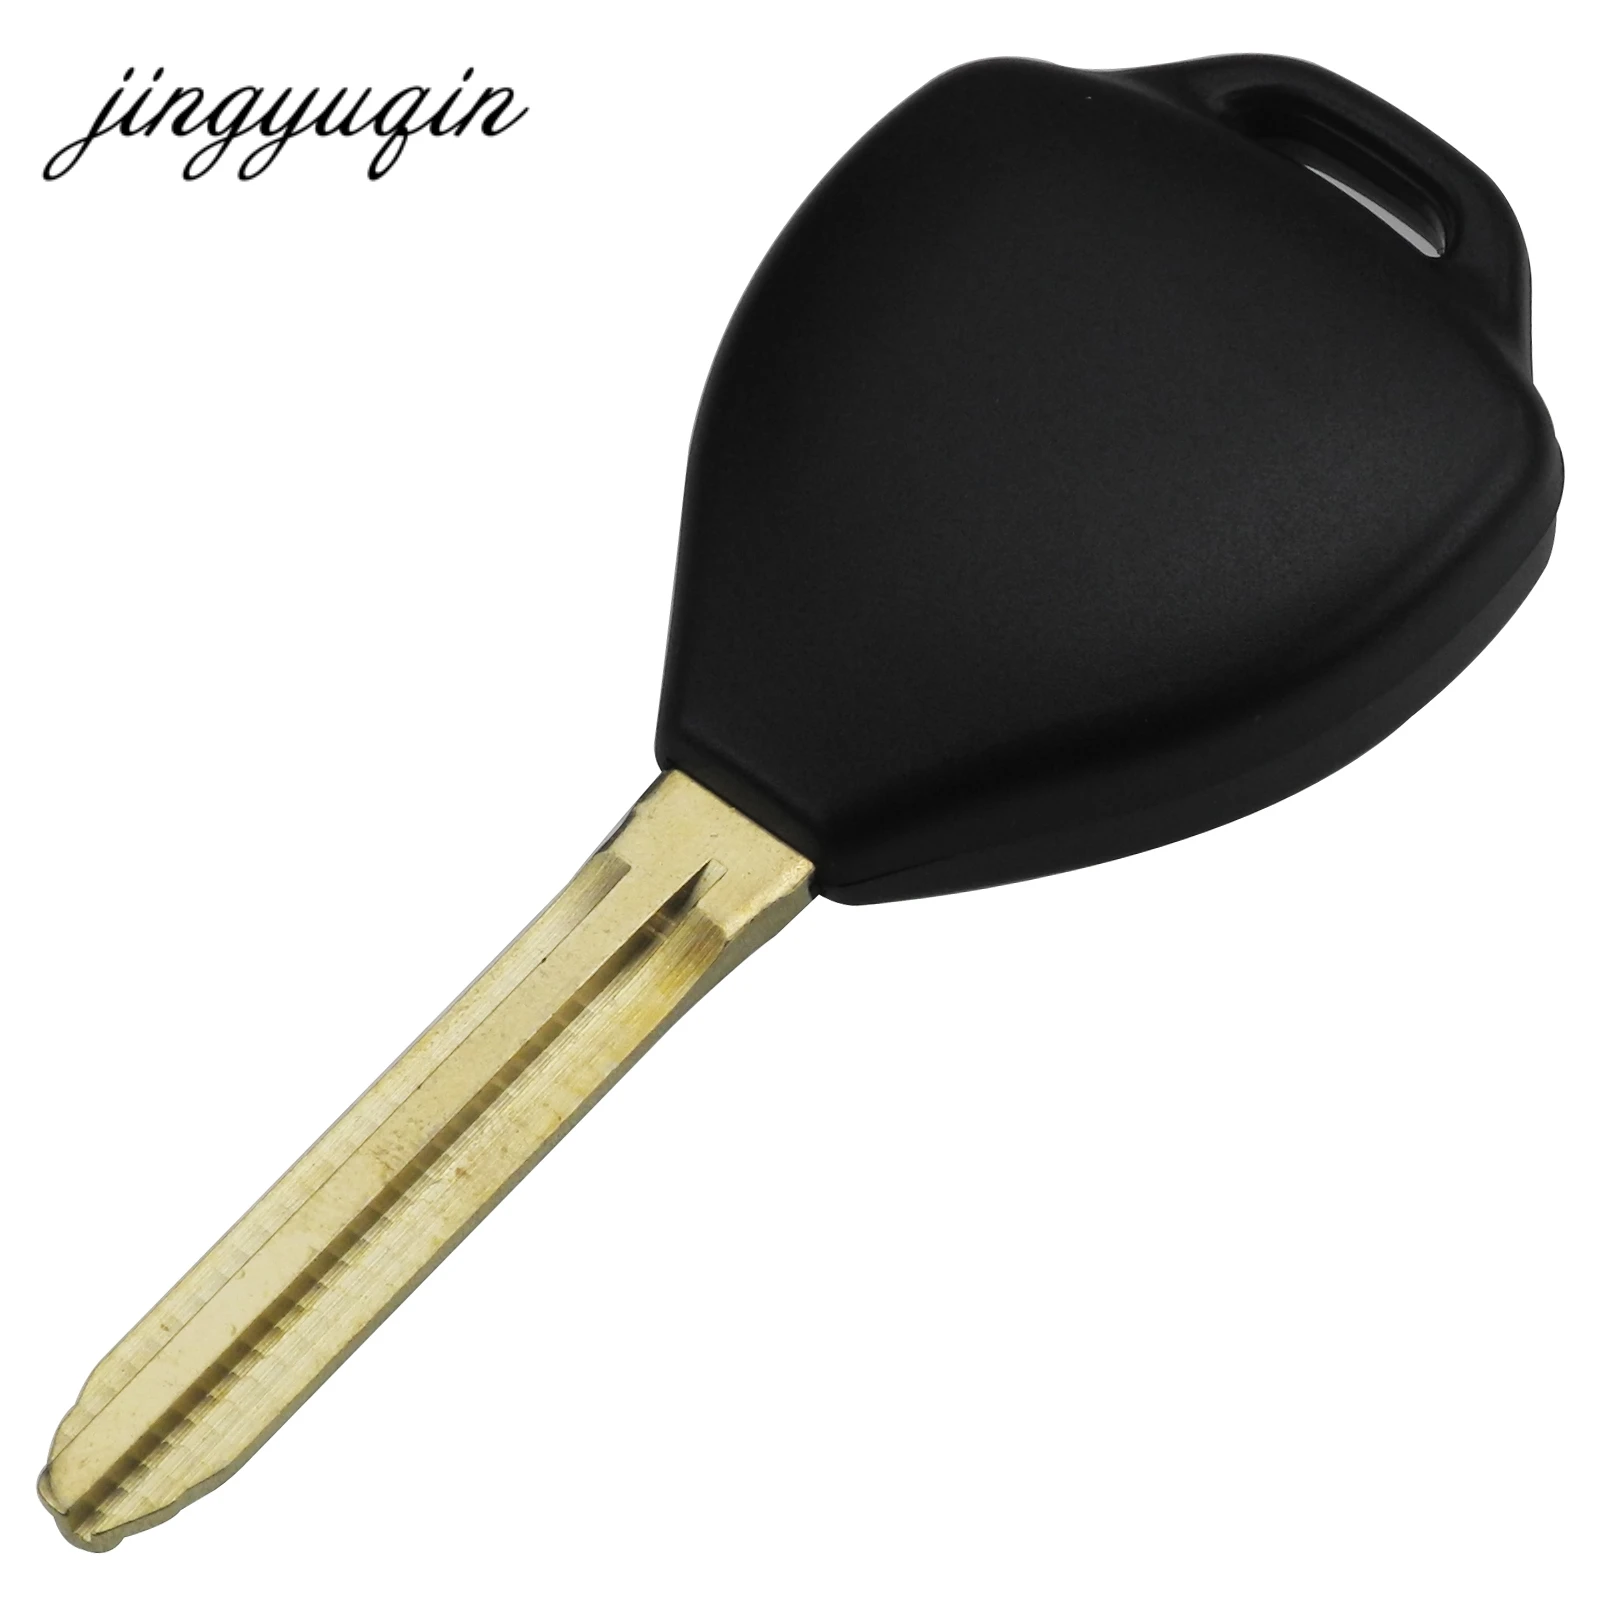 jingyuqin 10pcs/lot 3/4 Buttons Car Key Shell Case Fob For Toyota Corolla Alphard Camry TOY43 Blade